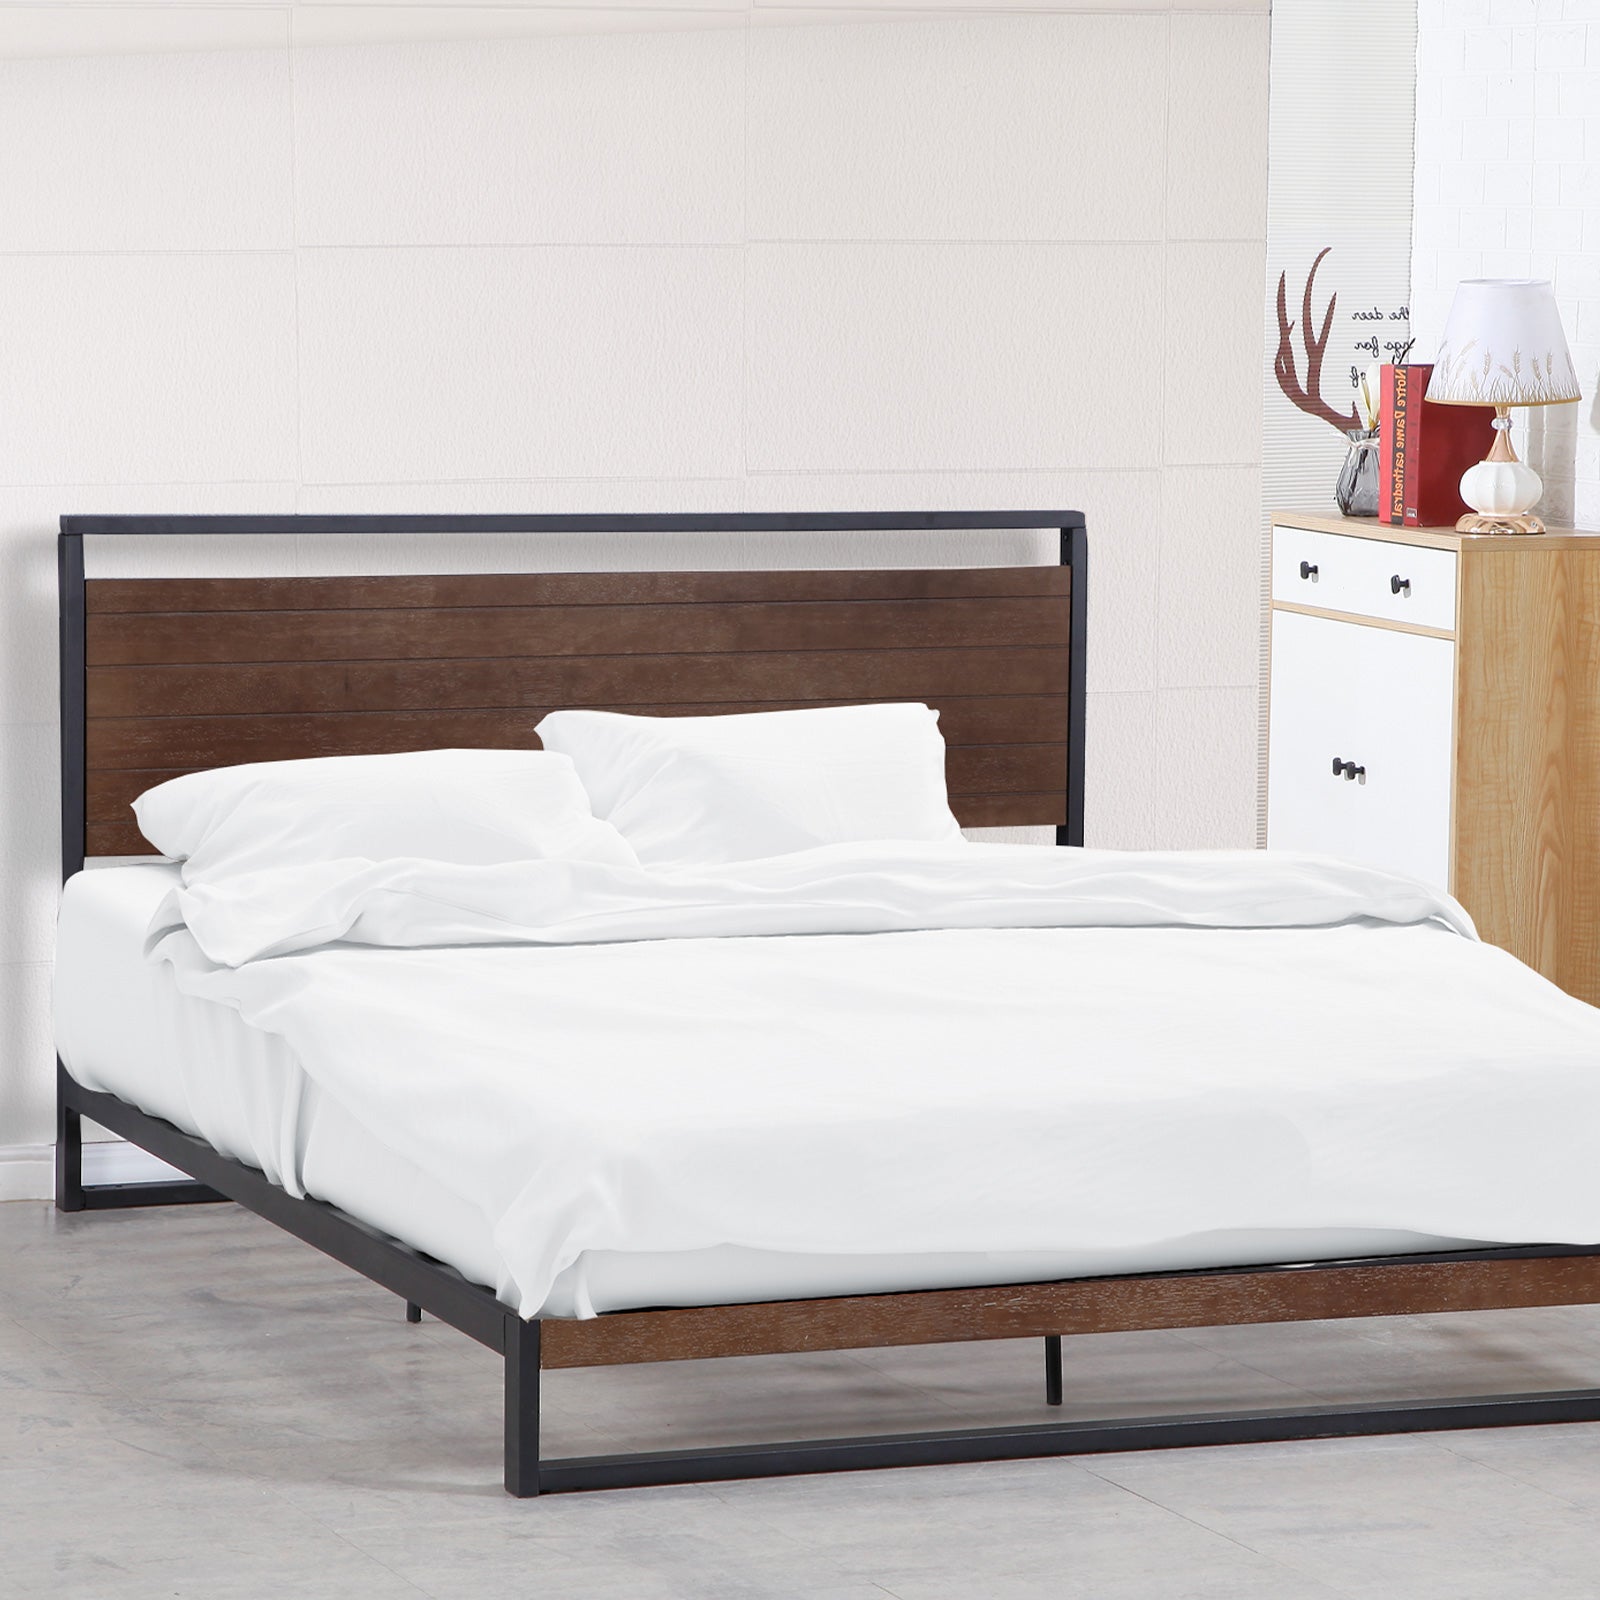 Milano Decor Azure Bed Frame With Headboard Black Wood Steel Platform Bed - Double - Black - SILBERSHELL